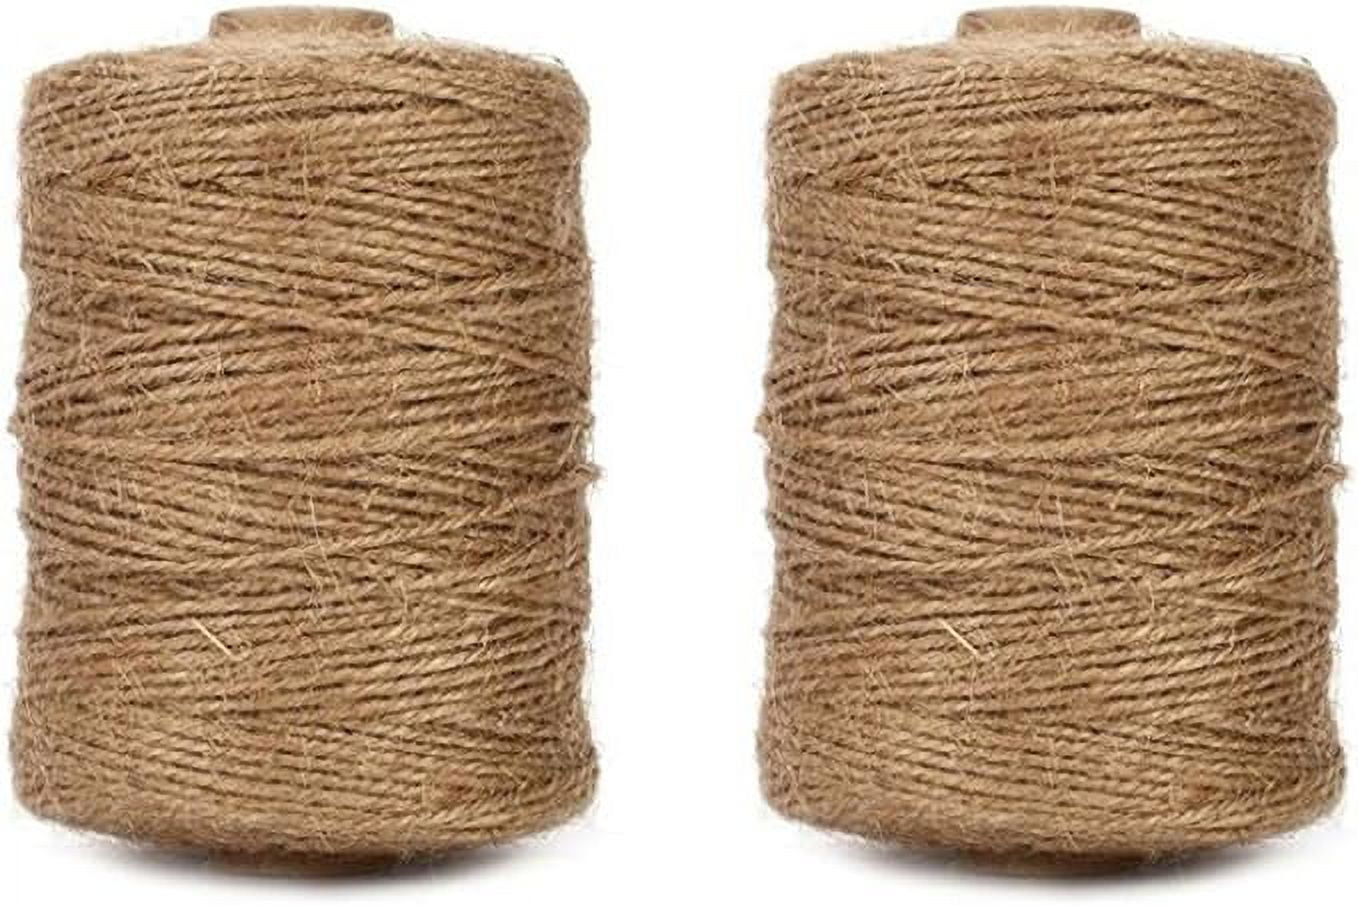  jijAcraft Jute Twine 820 Feet - 2.5mm Natural Jute Twine for  Crafts - Brown Garden Twine - 3Ply Heavy Duty Industrial Packing Materials  String Jute Rope for Craft Gift Wrapping, Packing